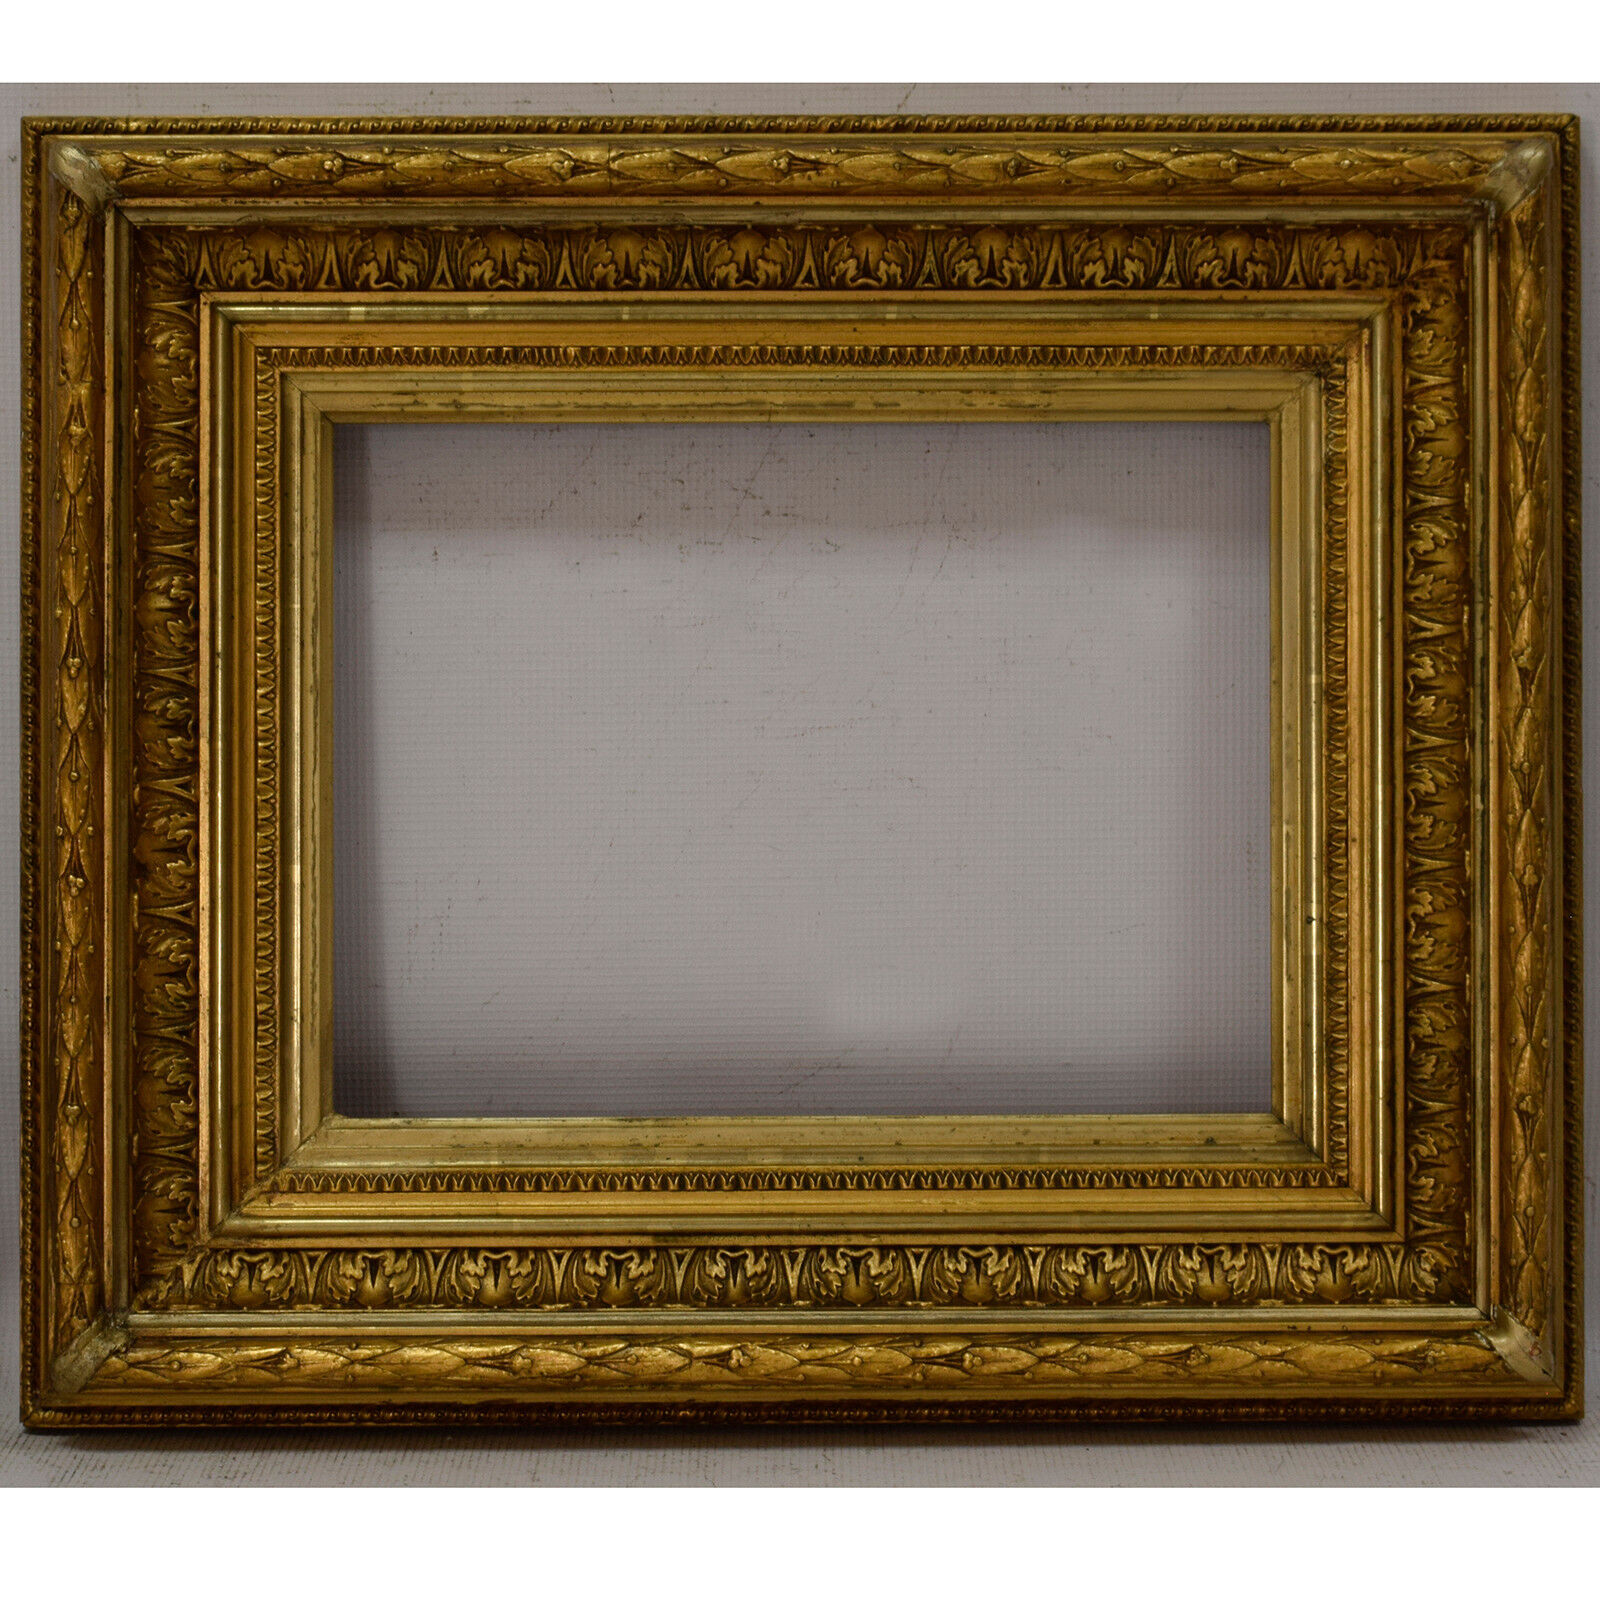 Ca.1900 Old wooden frame decorative original condition Internal: 13.5x10.4 in